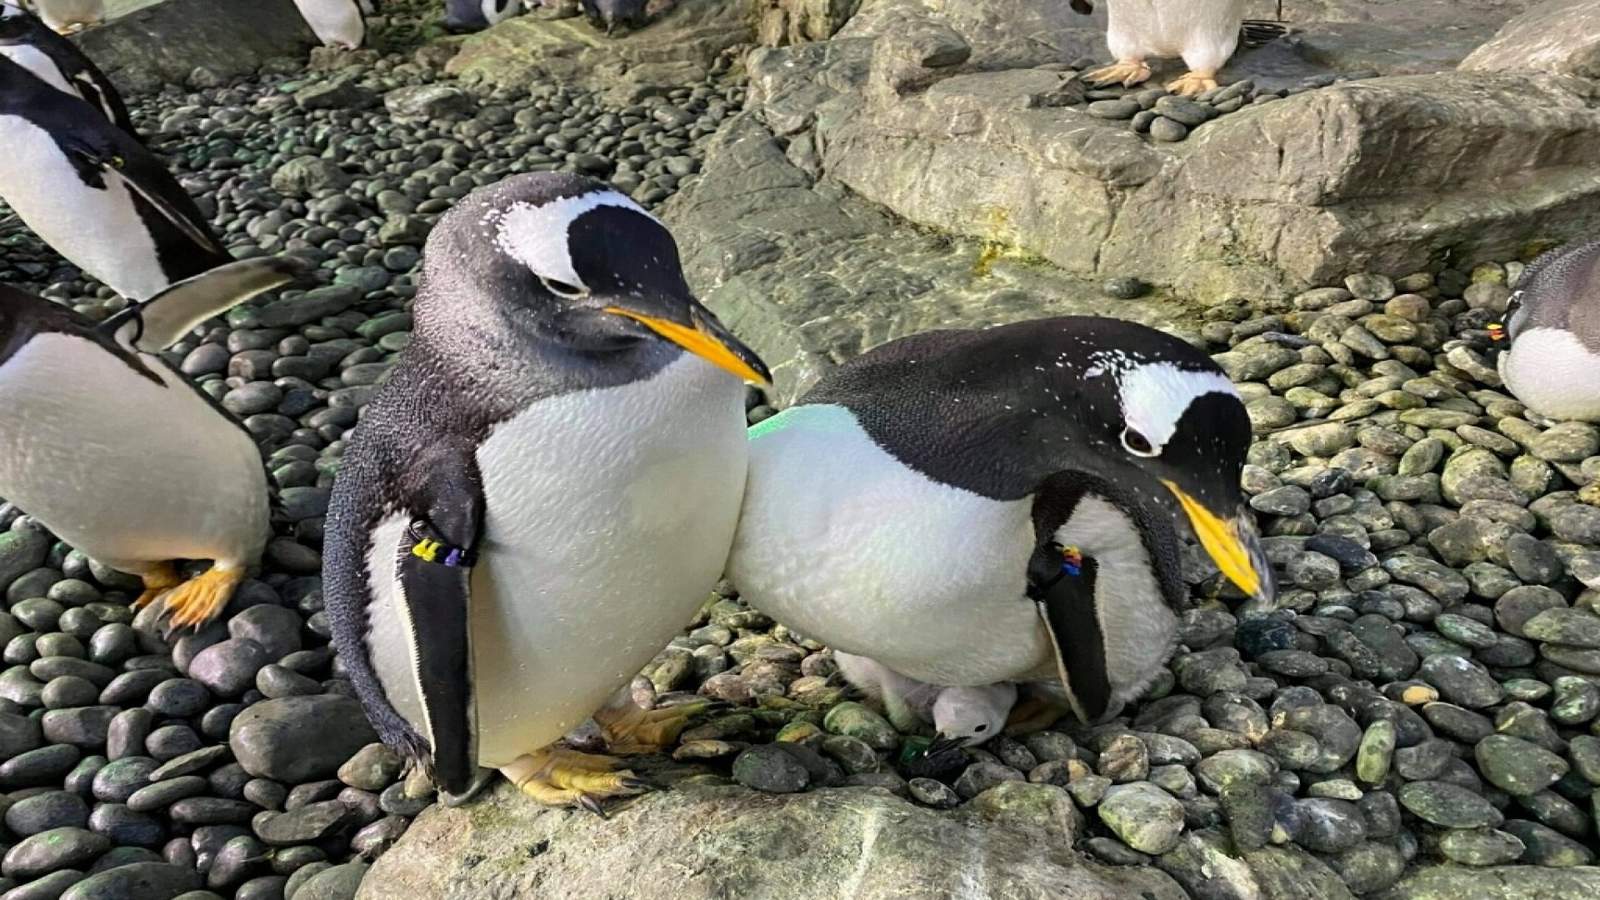 VIDEO: 2 male penguins raise foster chick of different species at SeaWorld San Antonio